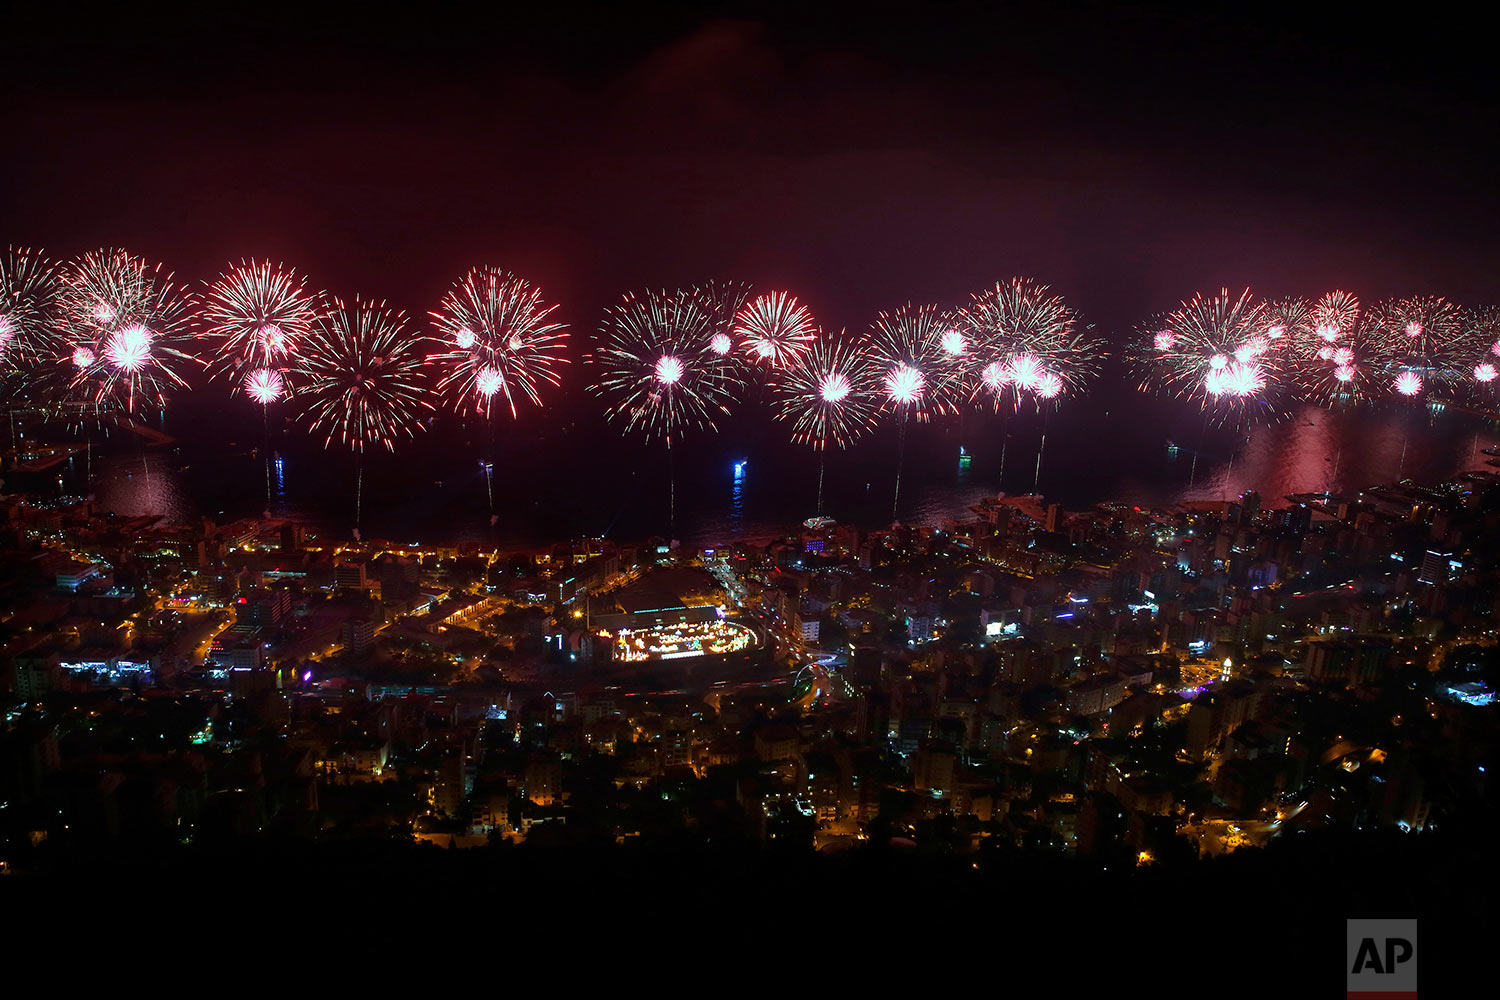 Fireworks explode over the coastal town of Jounieh, Lebanon, Saturday, July 15, 2017, during the city's international festival. The two-month annual festival includes concerts by local and international singers as well as plays and activities. (AP Photo/Bilal Hussein)